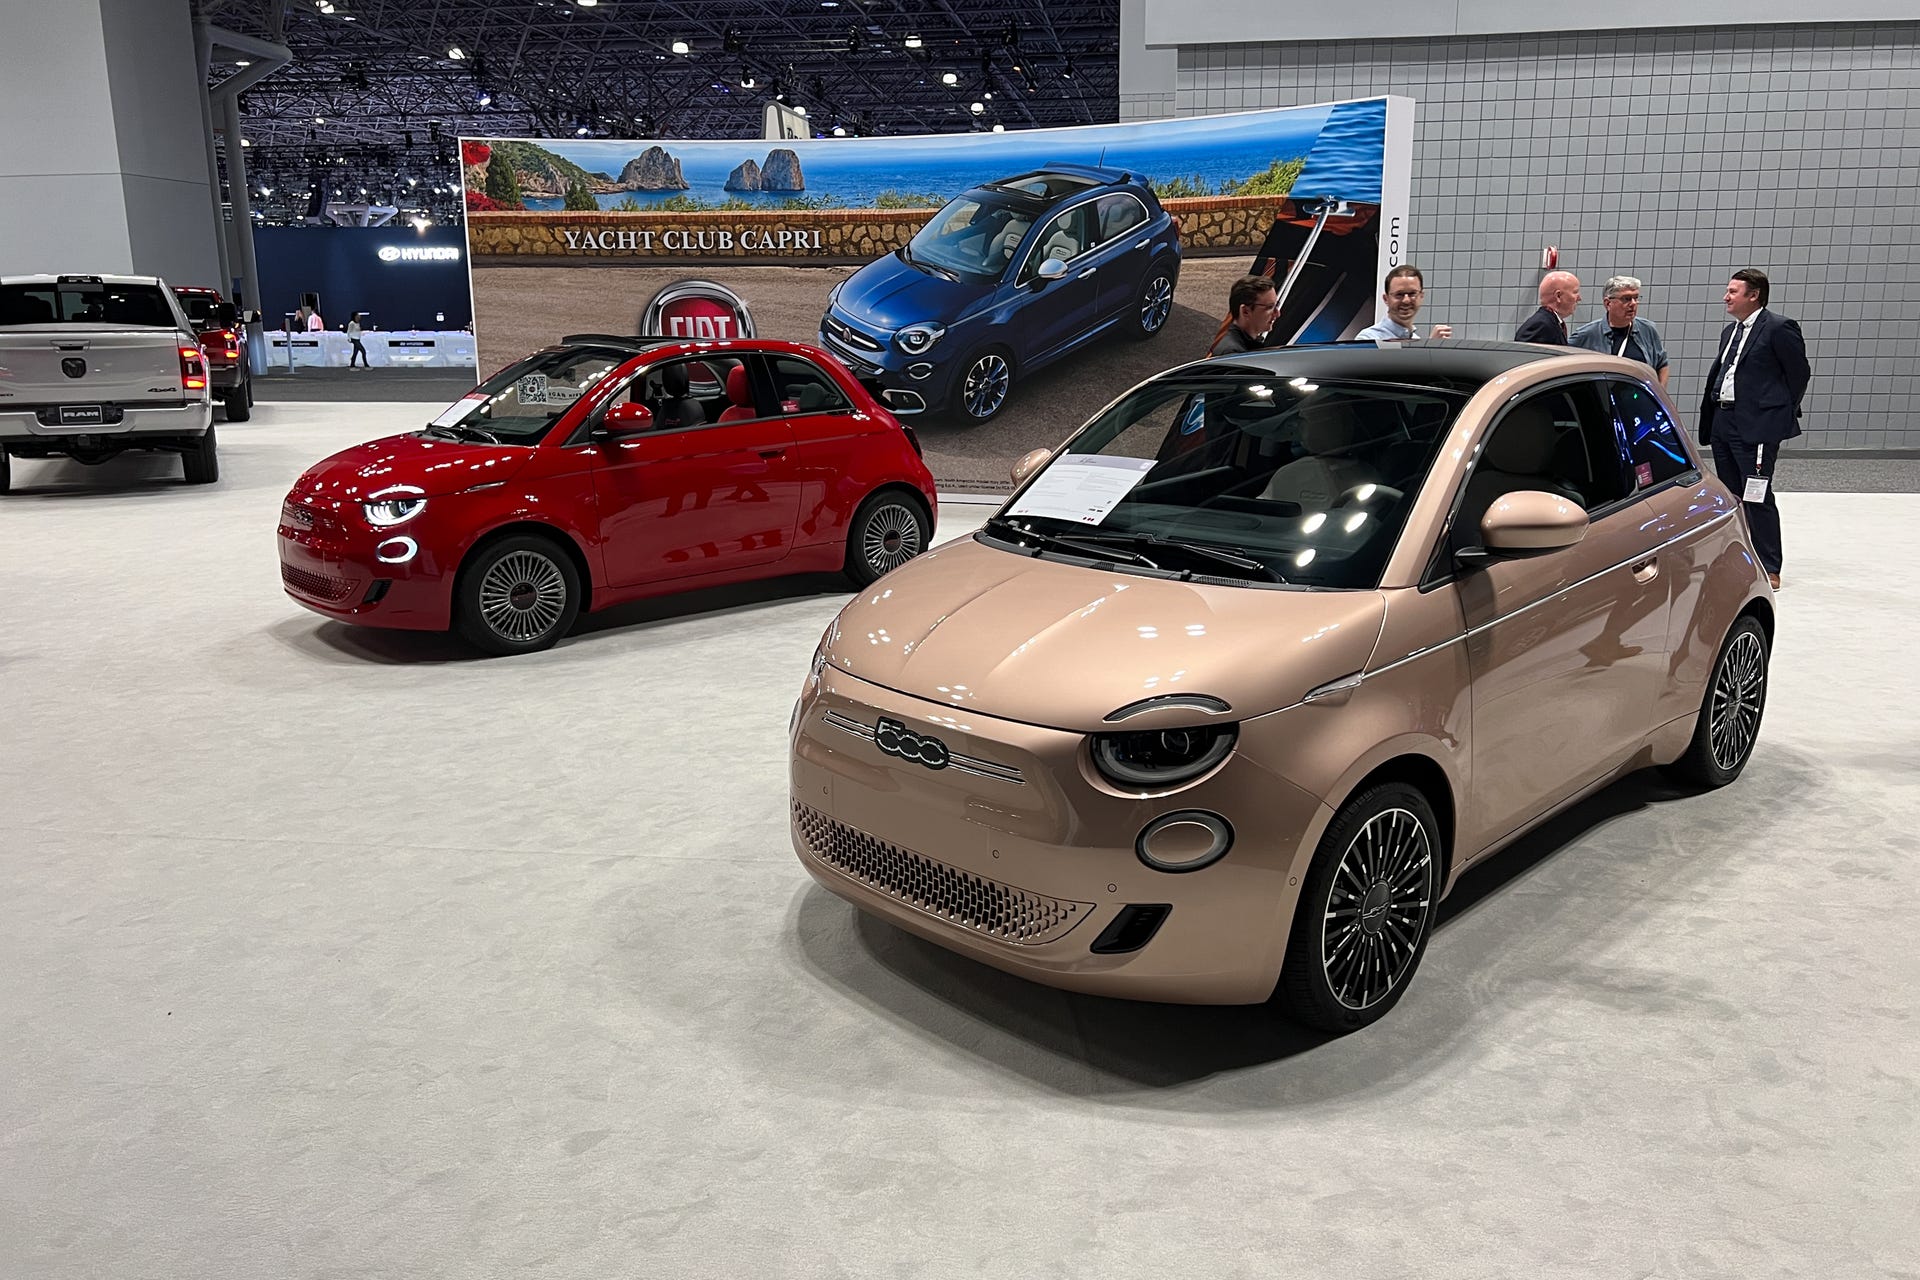 Fiat Is Rude As Hell for Bringing the Europe-Only 500 to the NY